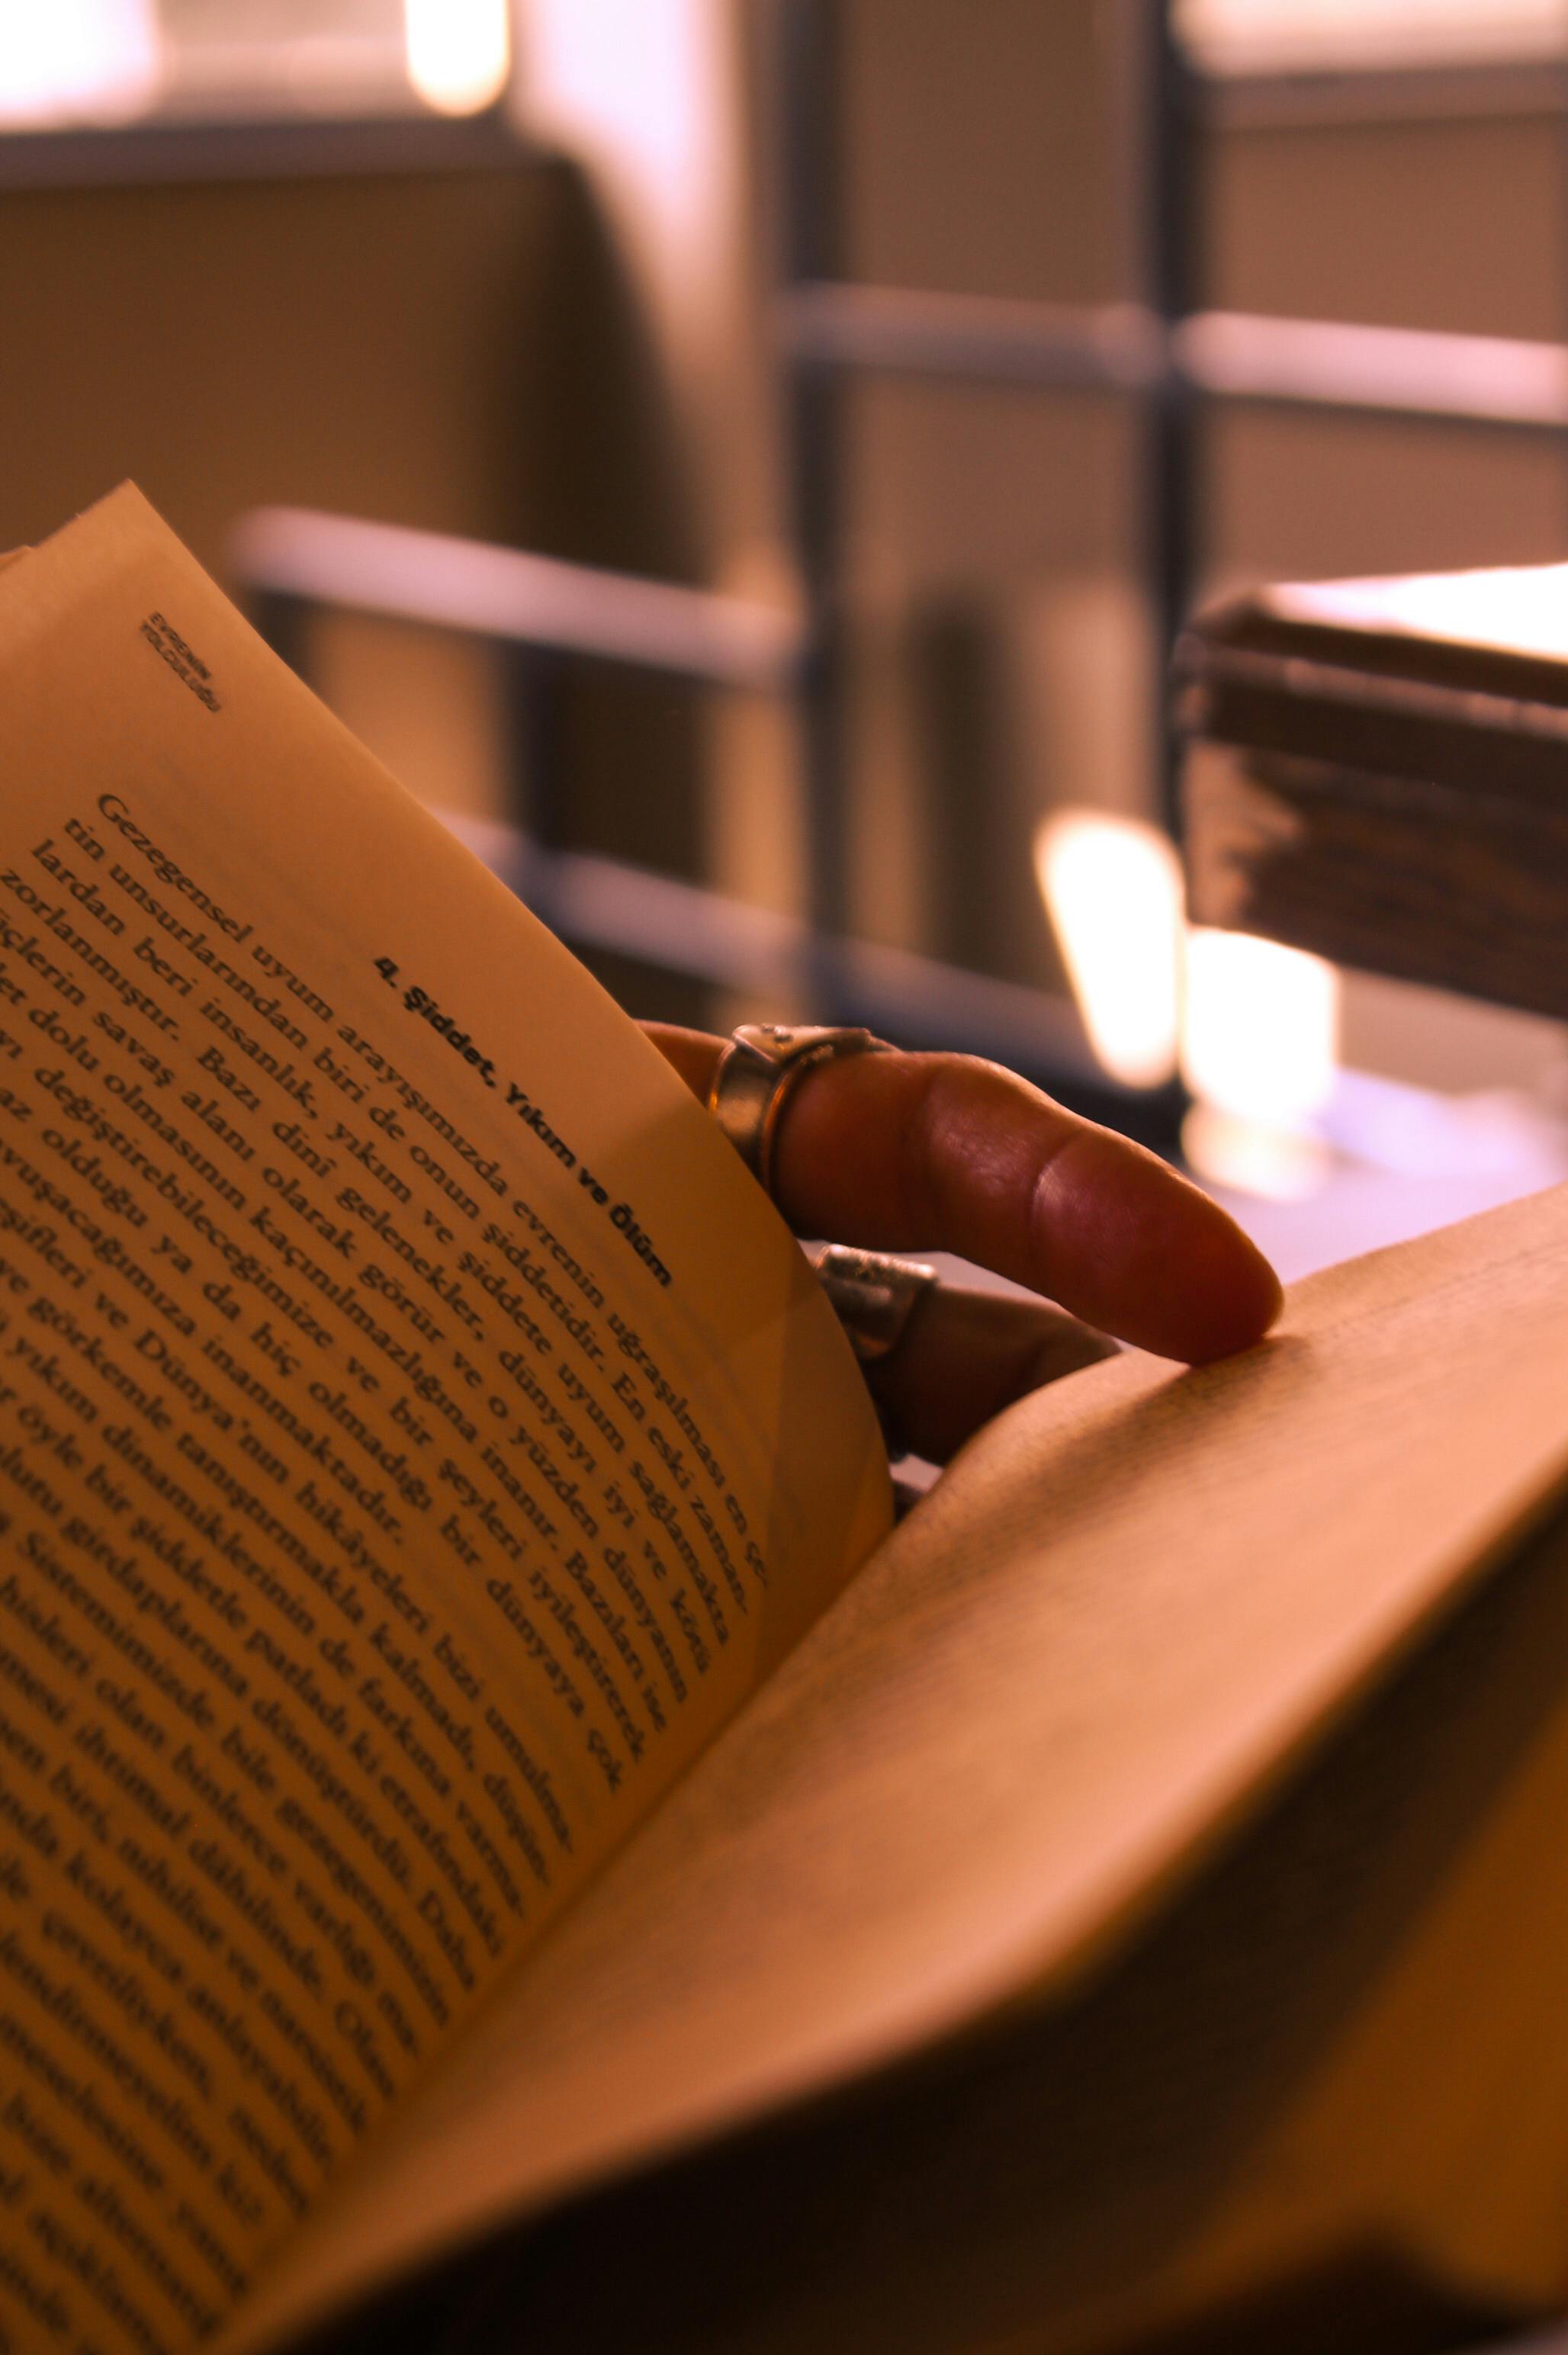  Read, Retain, Repeat: Rapid Reading Habits for Lifelong Learning